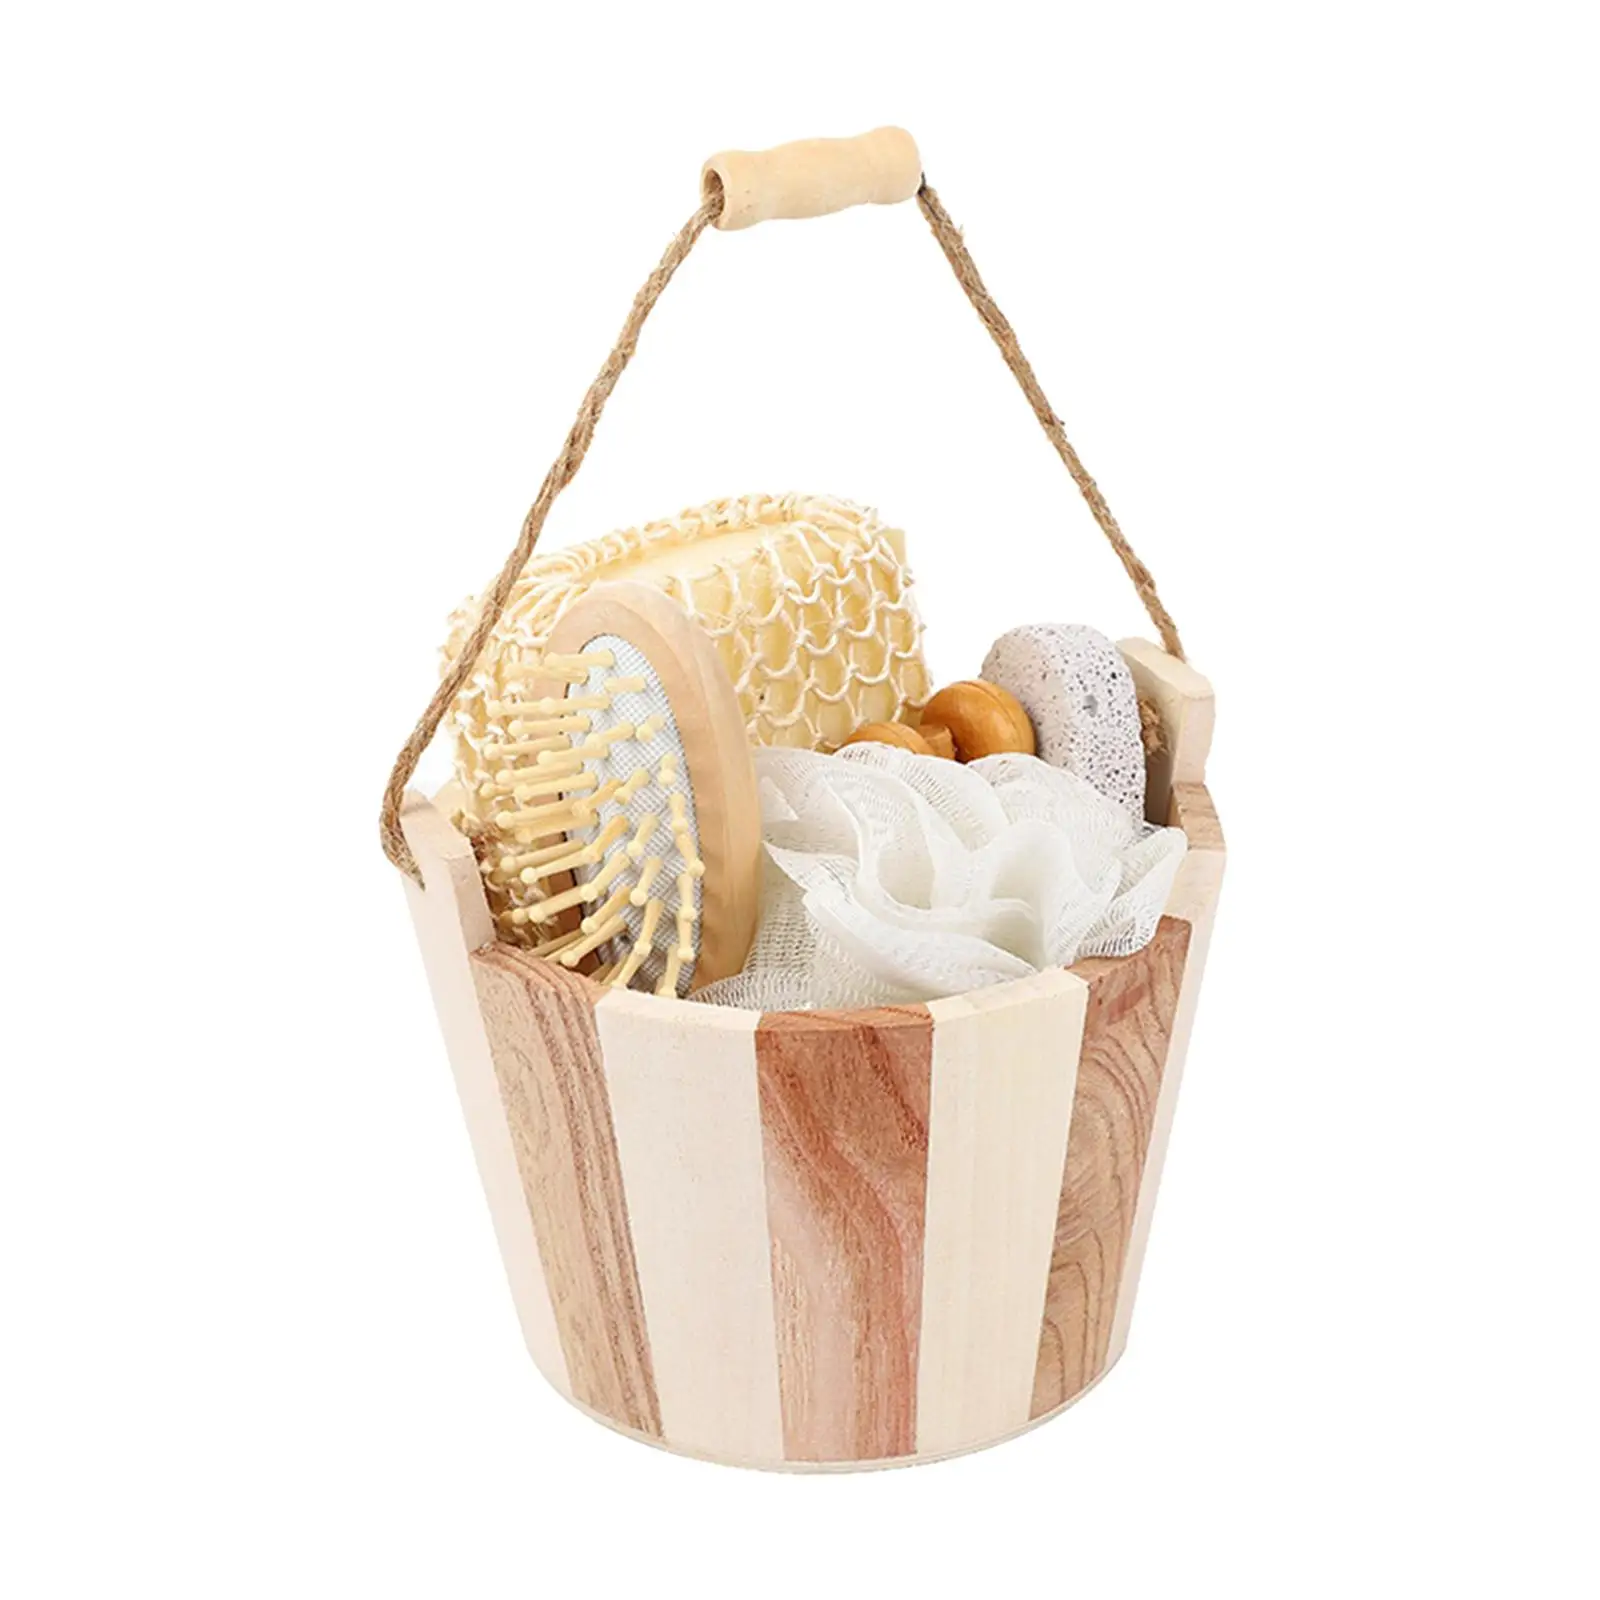 Portable Body Brush Set Scrubbing Tool Foot Scrubber Wooden Bucket Facial Massager Pumice Stone for Girls Boy Man Women Adults images - 6